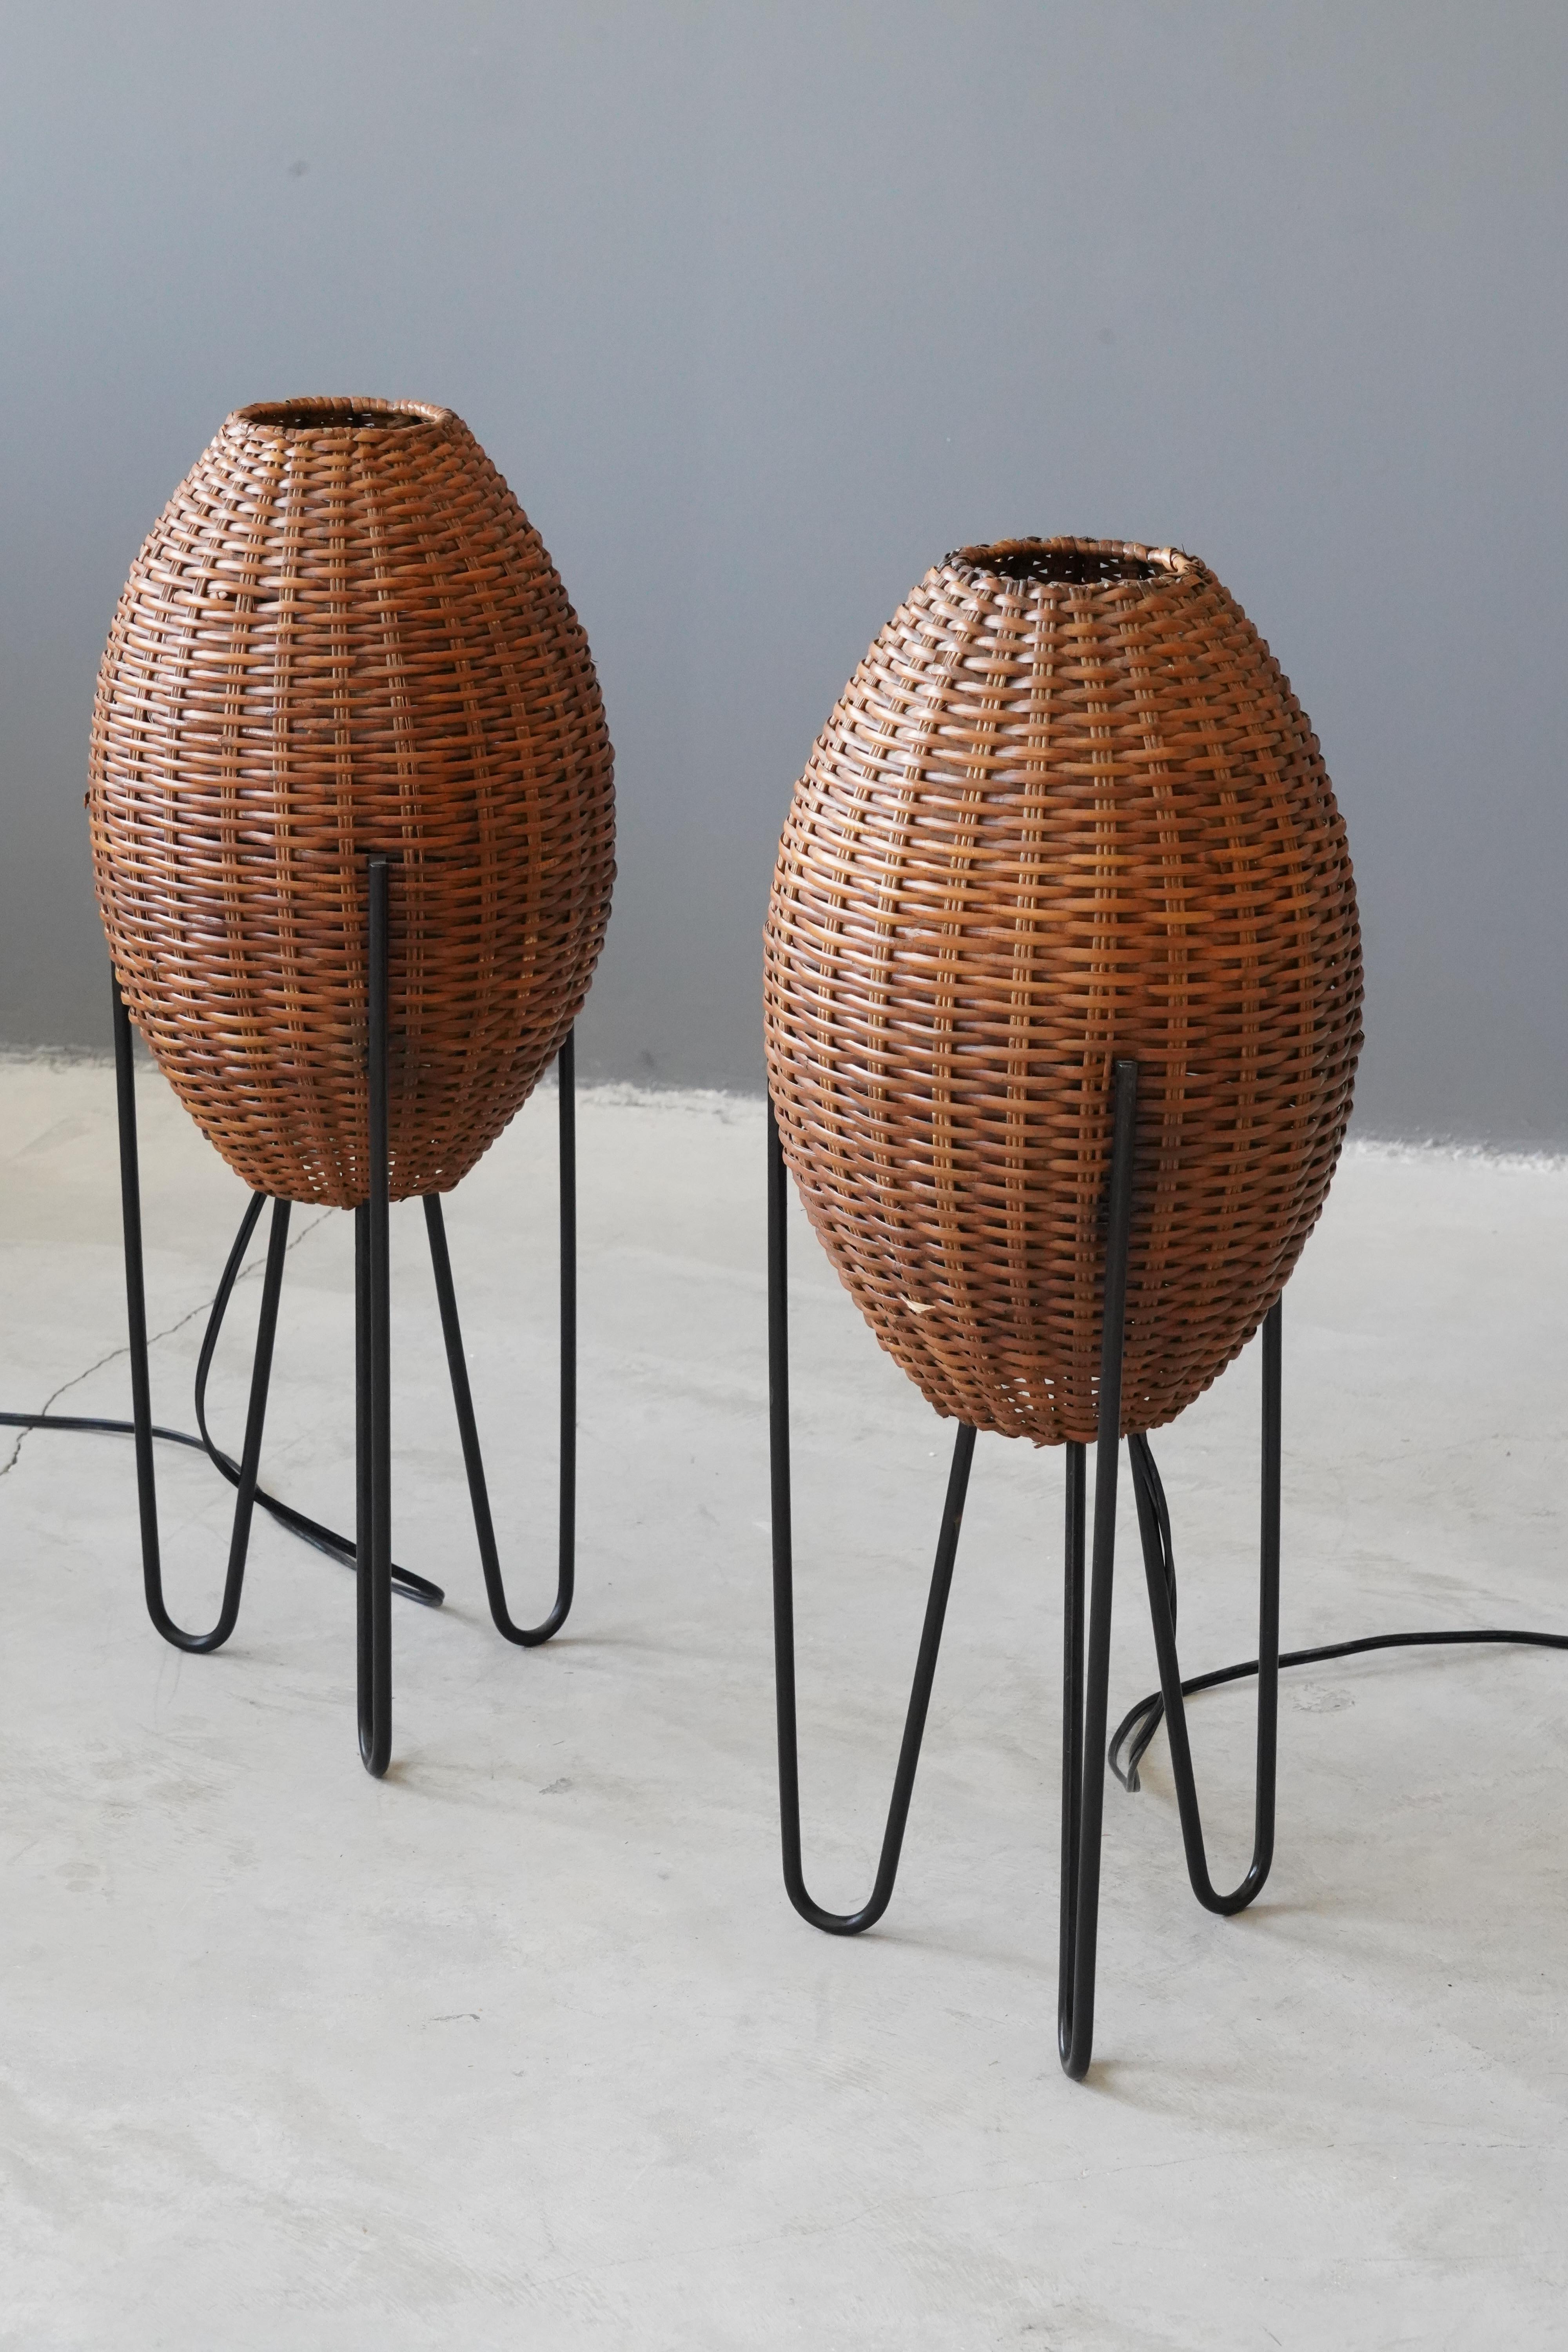 American Paul Mayén, Large Table Lamps, Wicker, Enameled Metal, United States, c. 1965